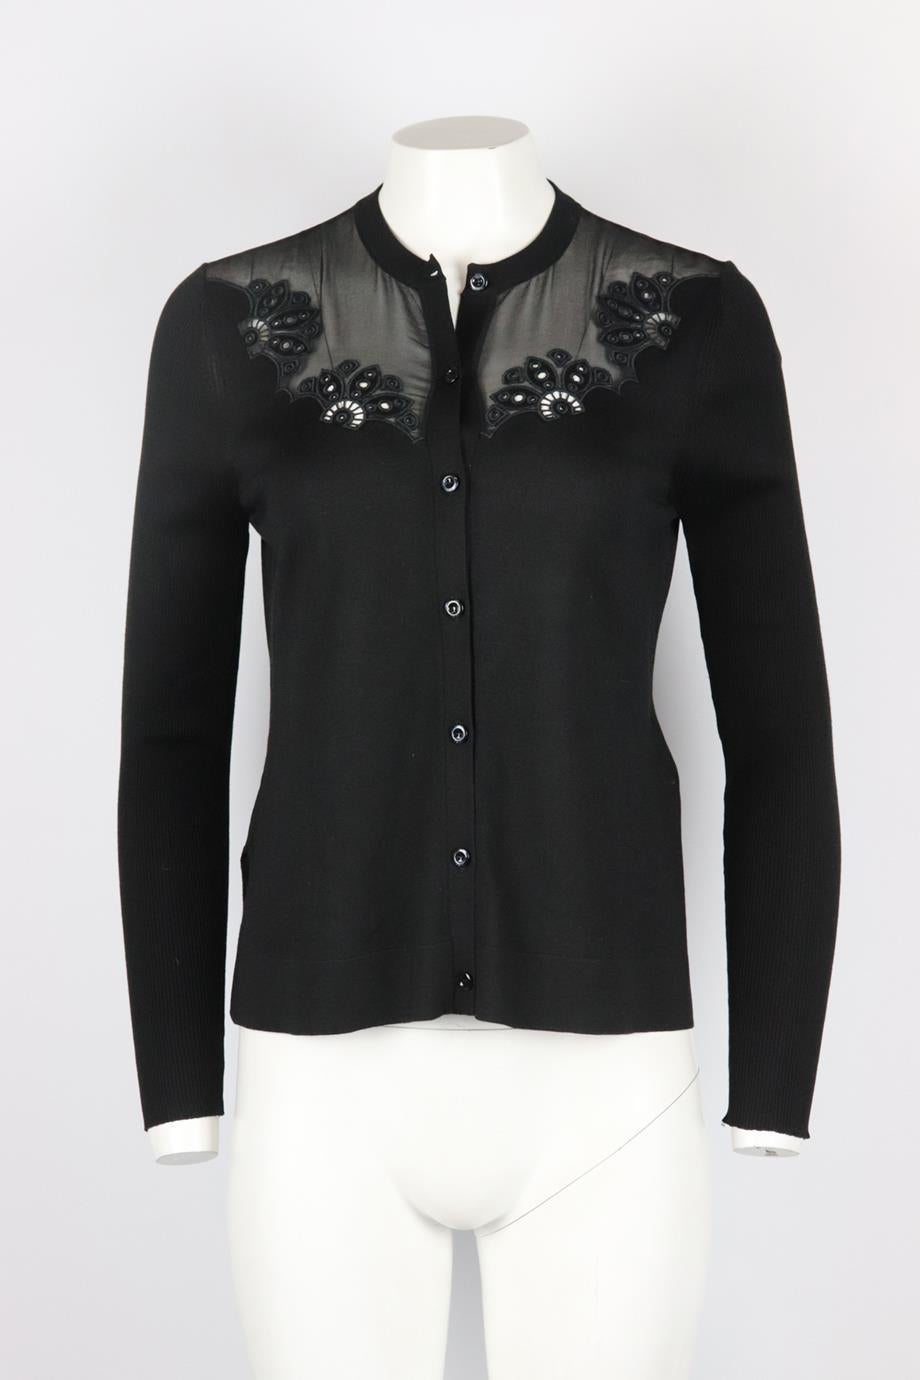 Fendi broderie anglaise silk cardigan. Black. Long sleeve, crew neck. Button fastening at front. 100% Silk; embroidery: 100% polyester. Size: IT 42 (UK 10, US 6, FR 38). Bust: 37 in. Waist: 34 in. Hips: 41 in. Length: 21.5 in. New with tags